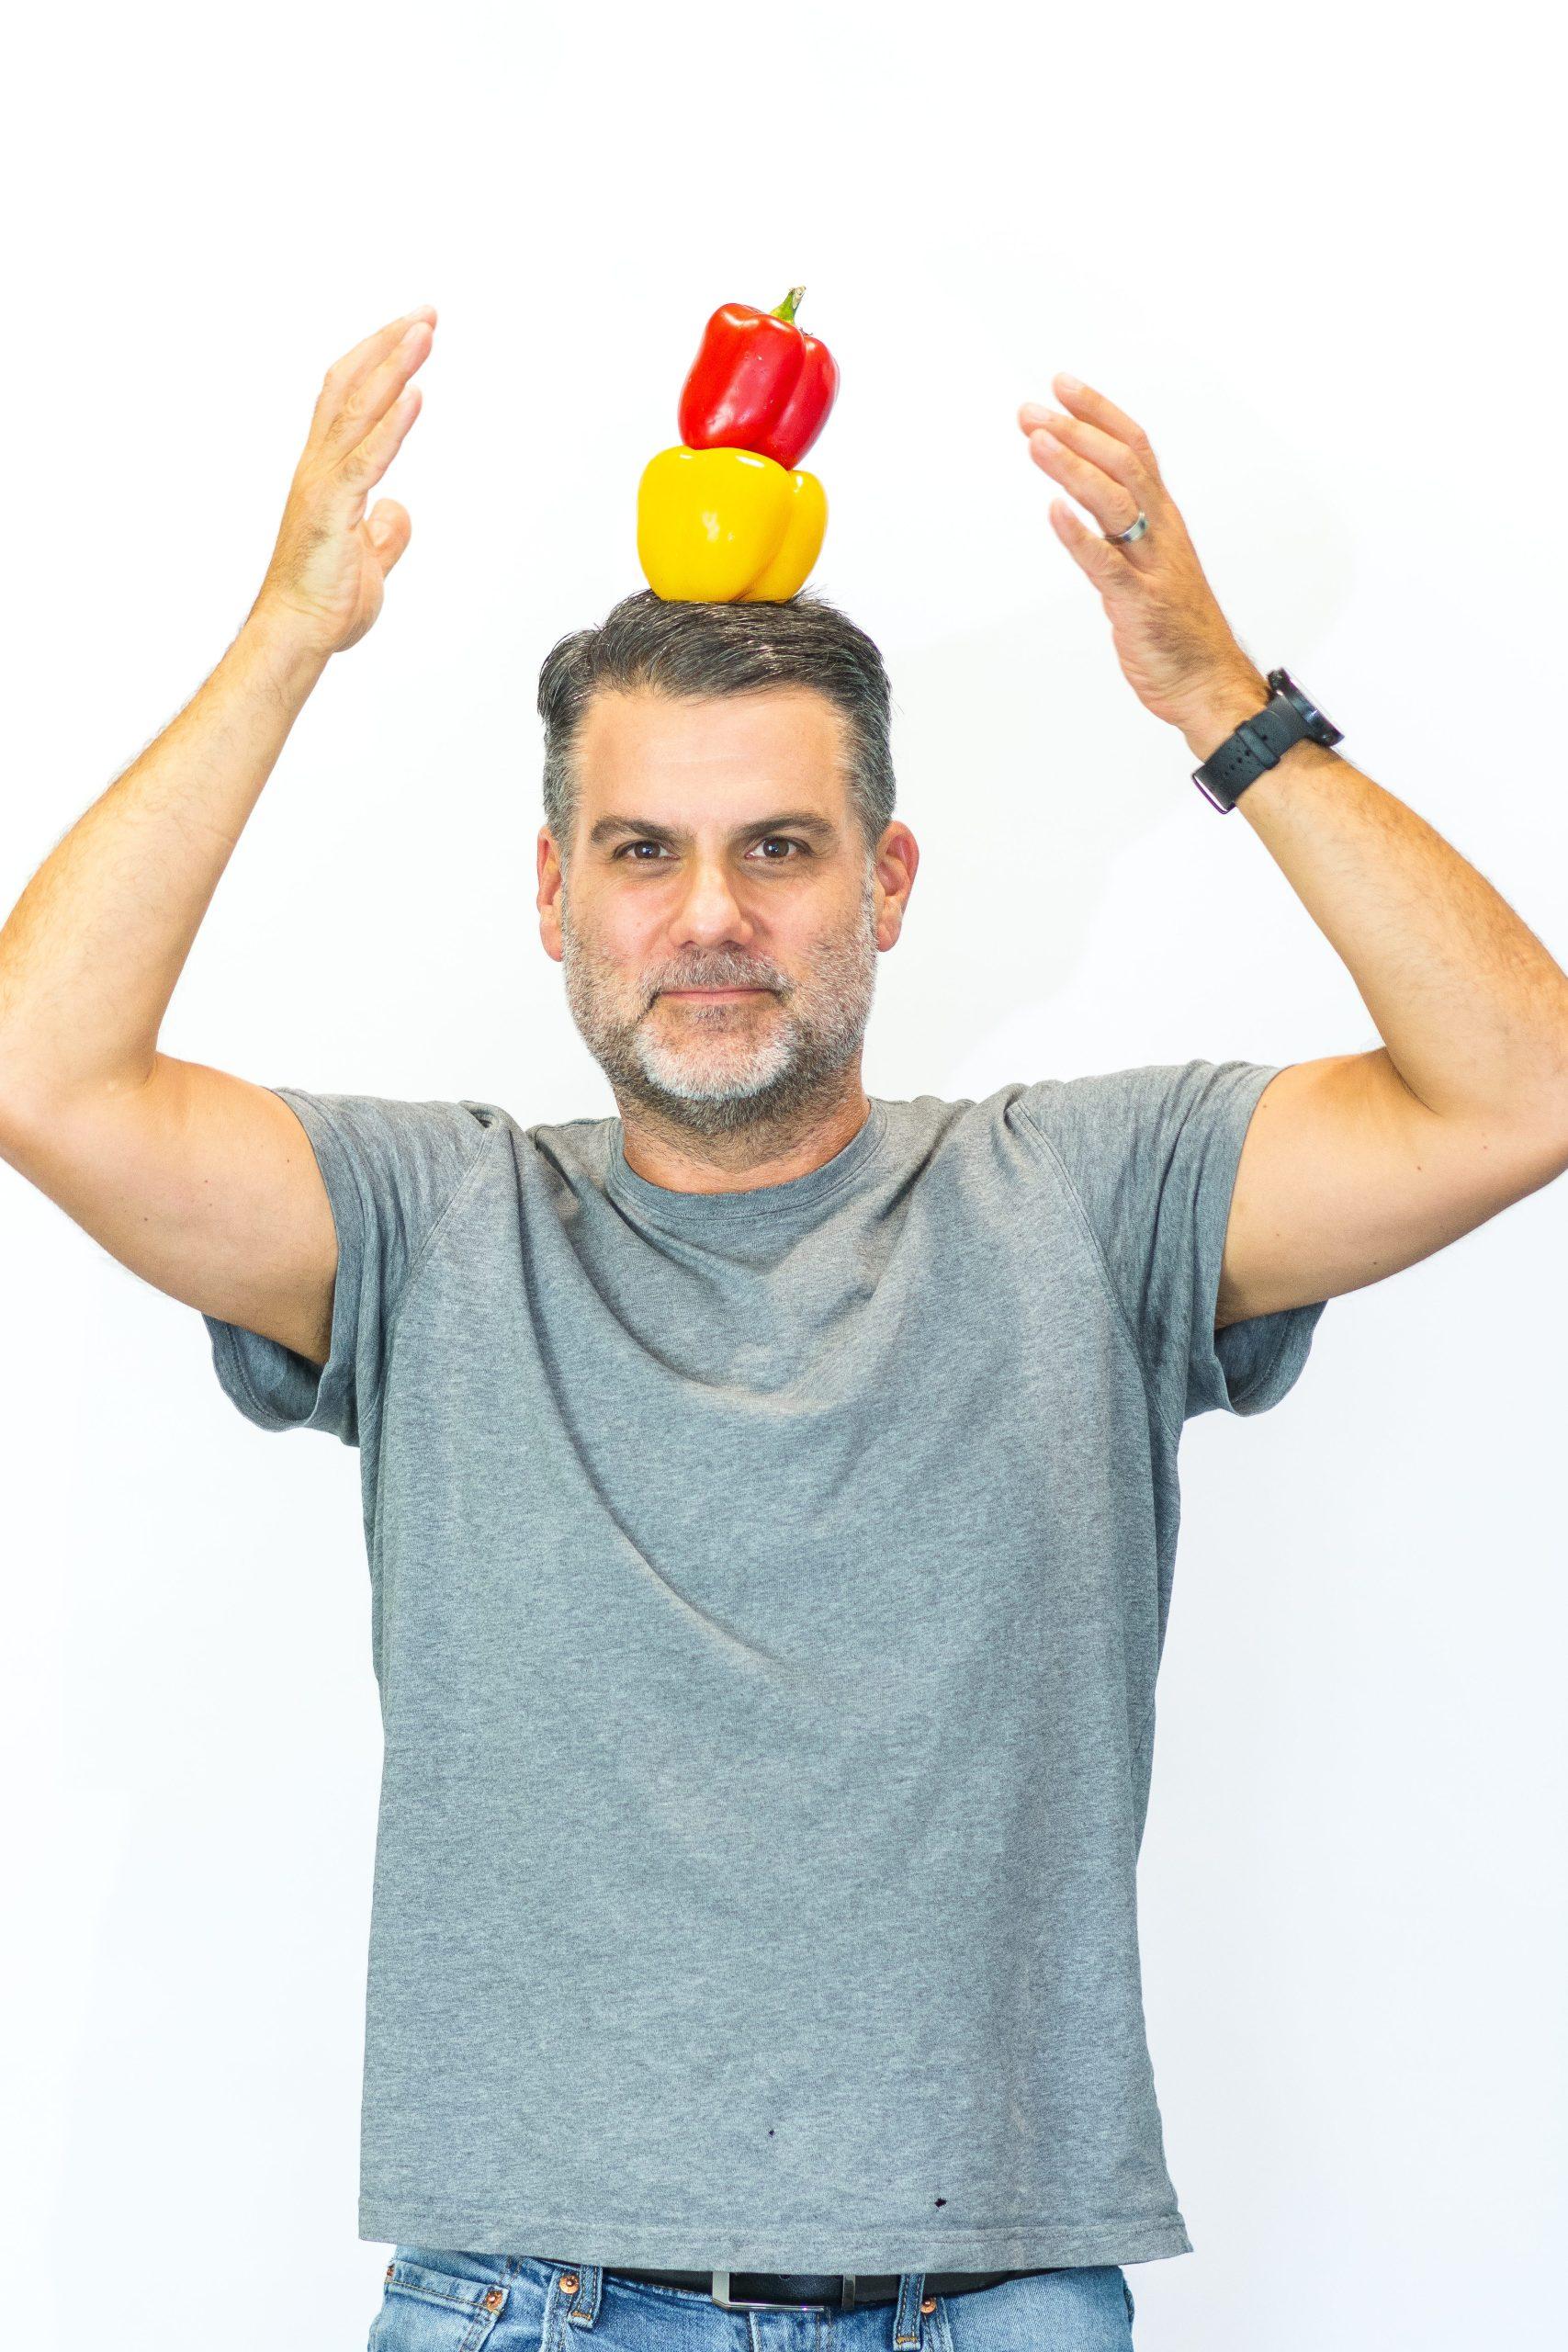 Director of Supply Chain & Logistics, Duncan, poses with two bell peppers balanced on his head